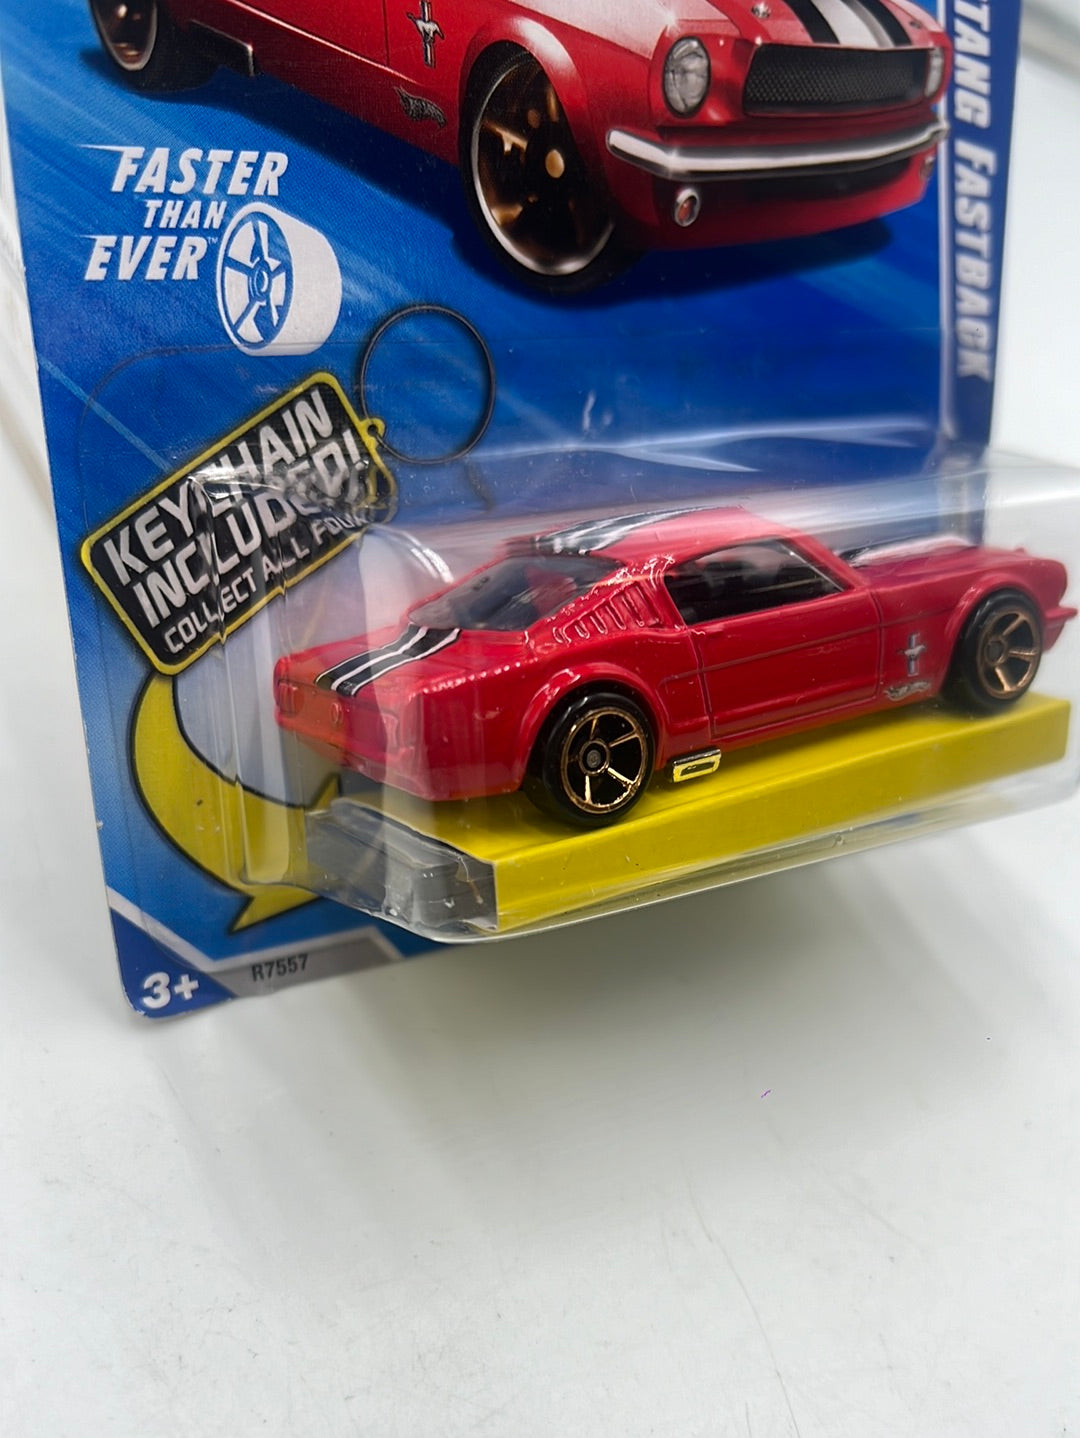 2010 Hot Wheels Faster Than Ever Ford Mustang Fastback Walmart Exclusive Twin Mill Key Chain Red 132/240 235B